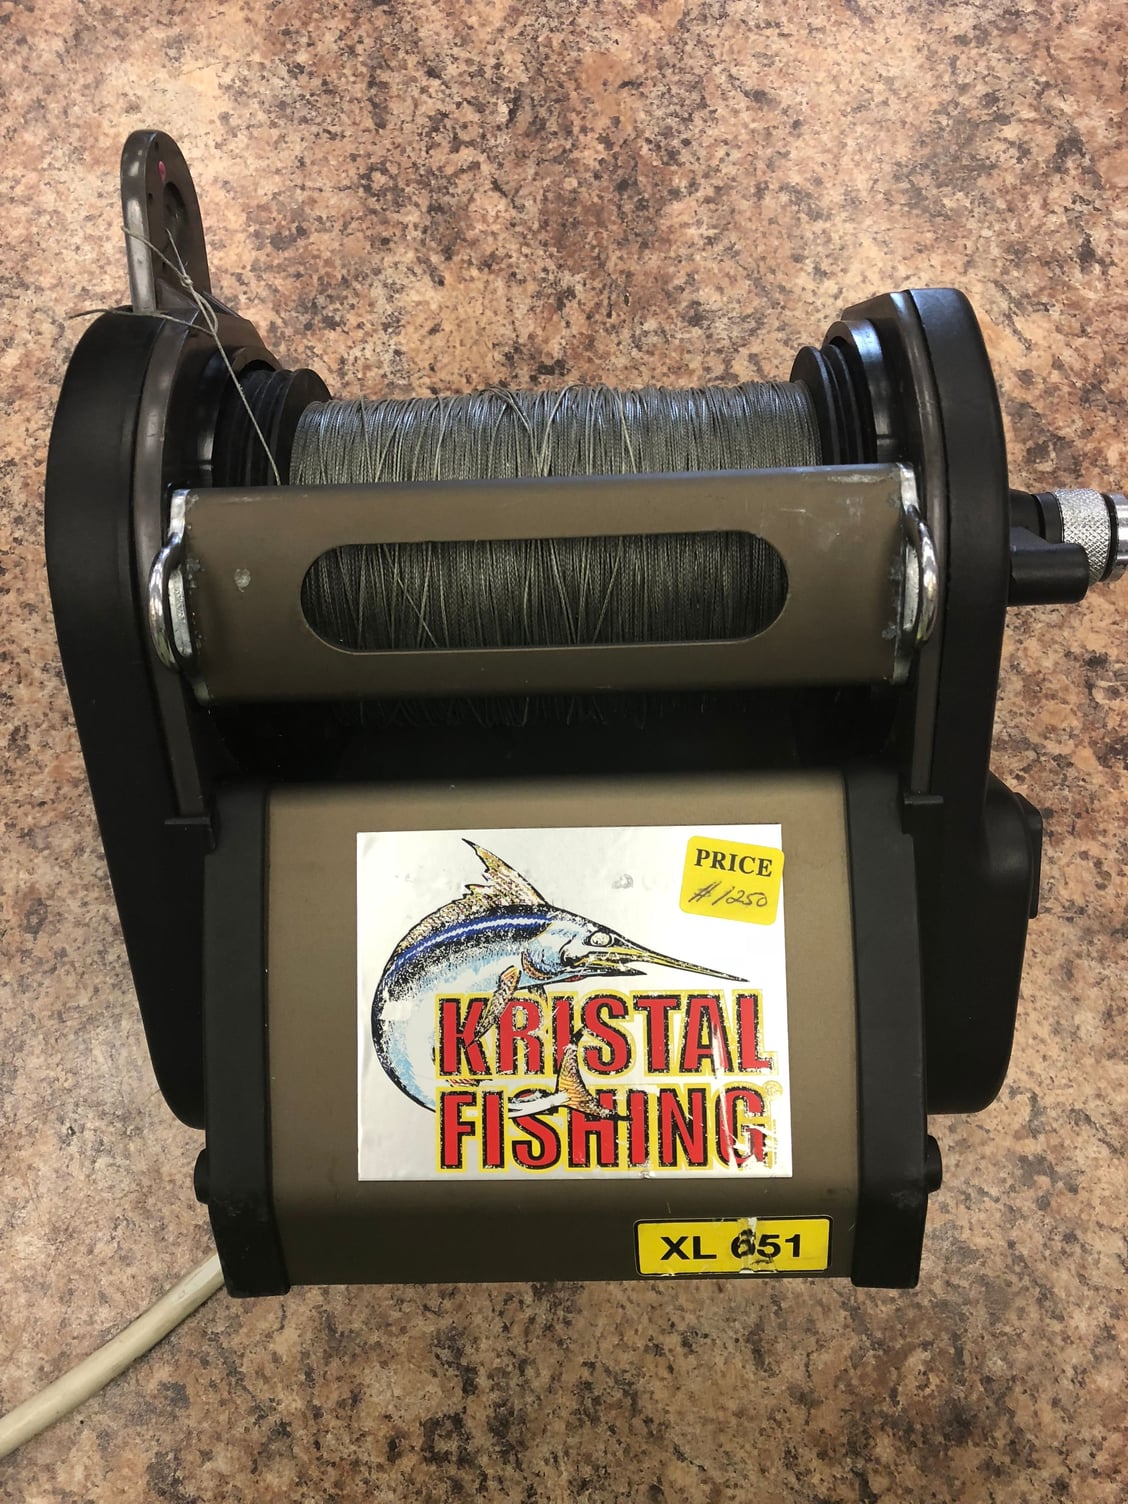 Kristal Fishing series 600, XL 651 electric reel $1250 - The Hull Truth -  Boating and Fishing Forum